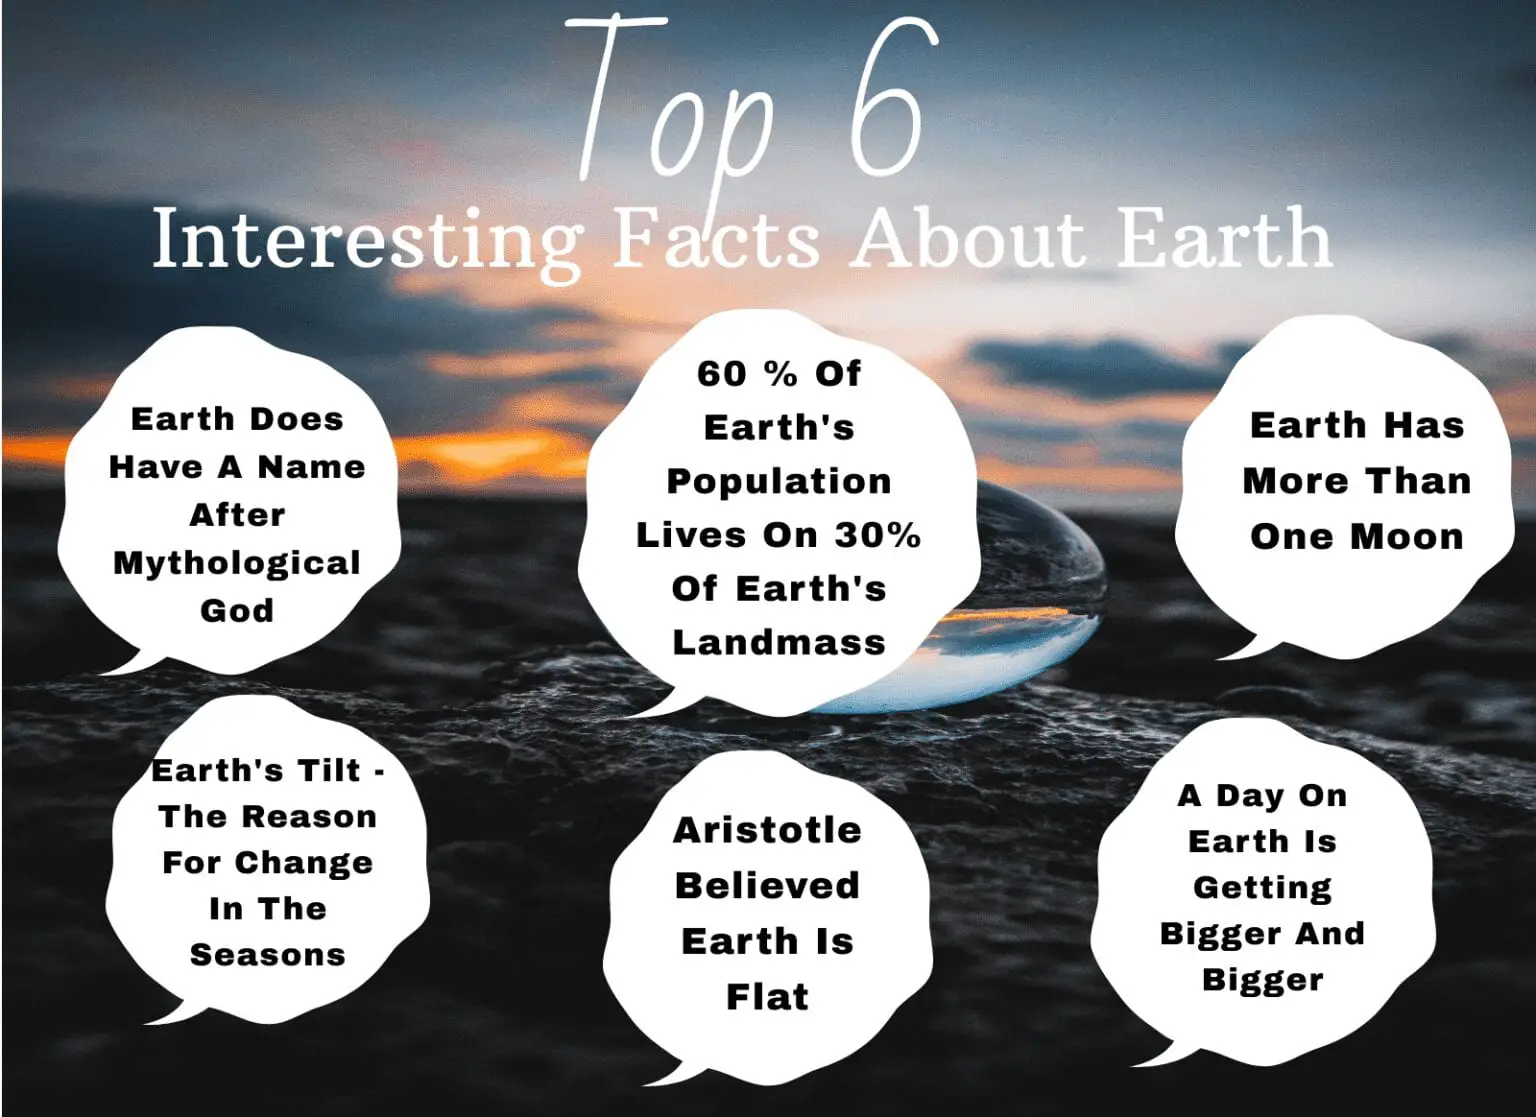 earth-facts-top-6-interesting-facts-about-earth-physics-in-my-view